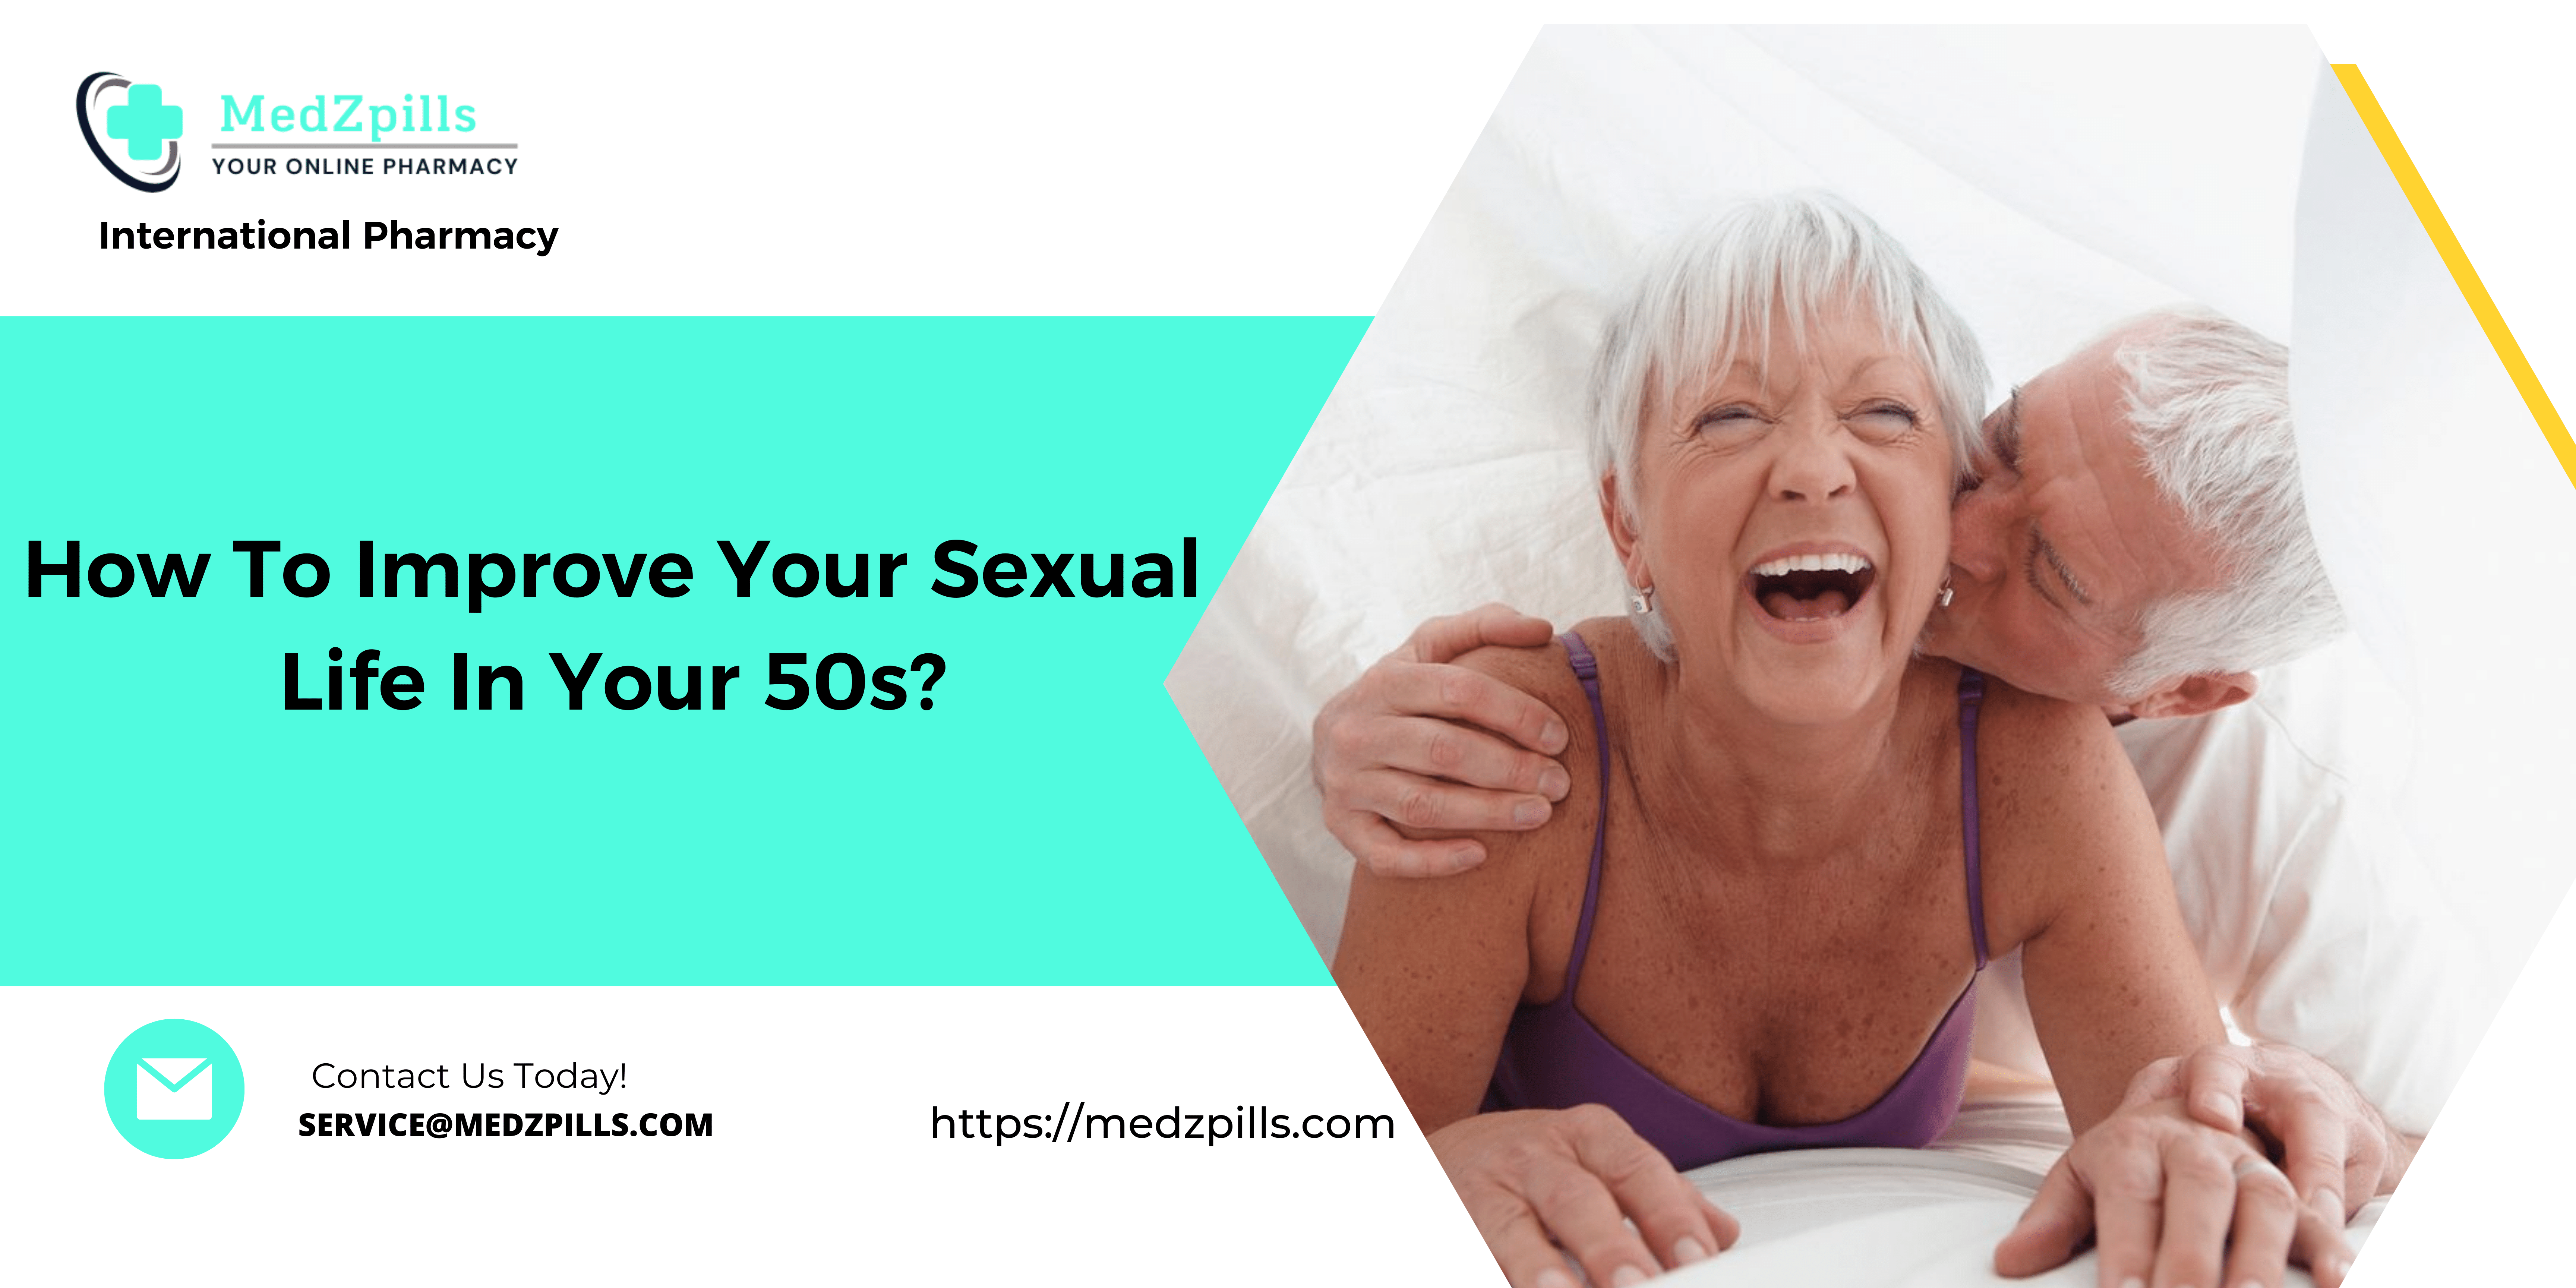 How To Improve Your Sexual Life In Your 50s?